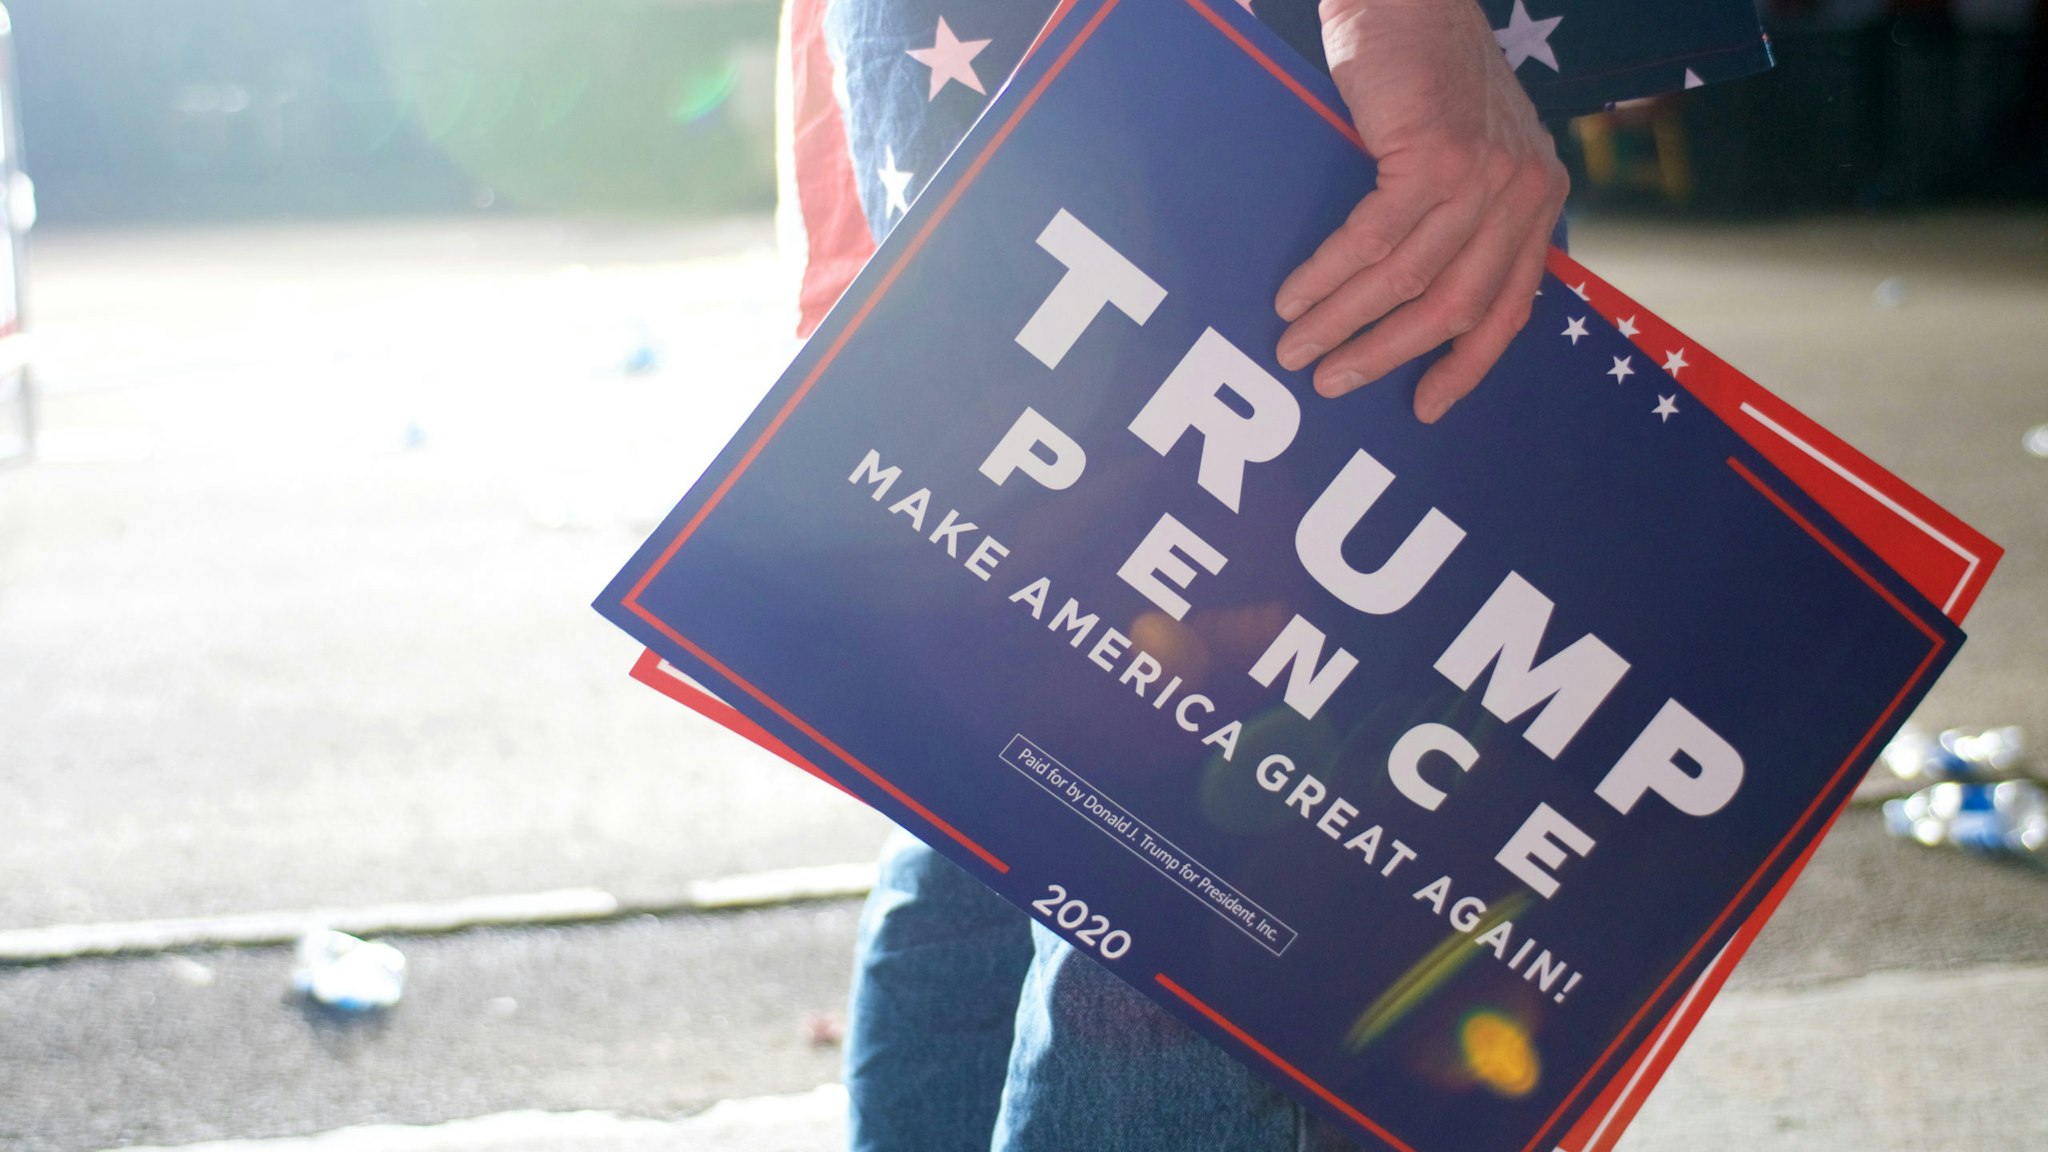 A supporters stands signs as US President Donald J Trump departs after speaking at a MAGA rally at the Williamsport Regional Airport, in Montoursville, PA on May 20, 2019.